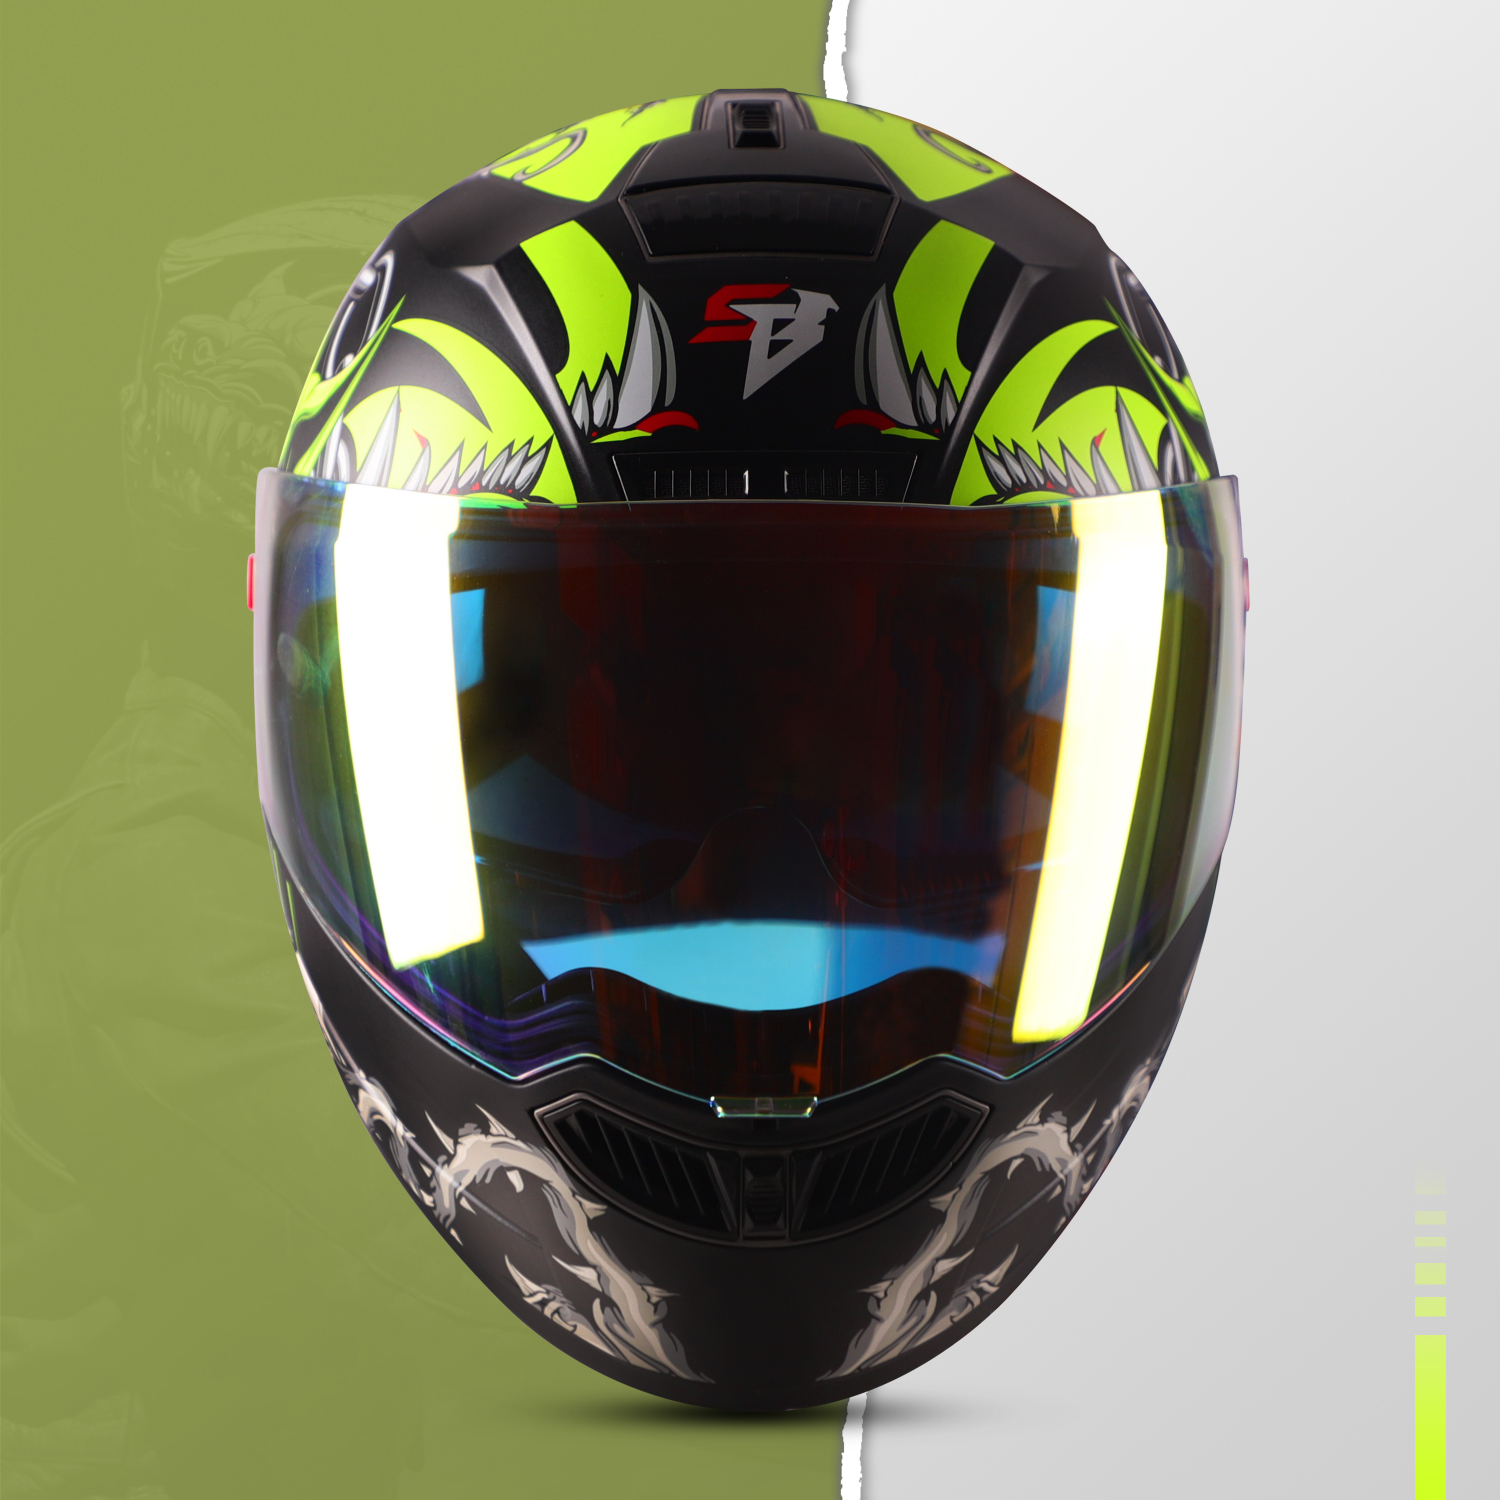 Steelbird SBA-1 Angry Dog ISI Certified Full Face Graphic Helmet For Men And Women With Inner Smoke Sun Shield (Matt Black Neon With Night Vision Gold Visor)